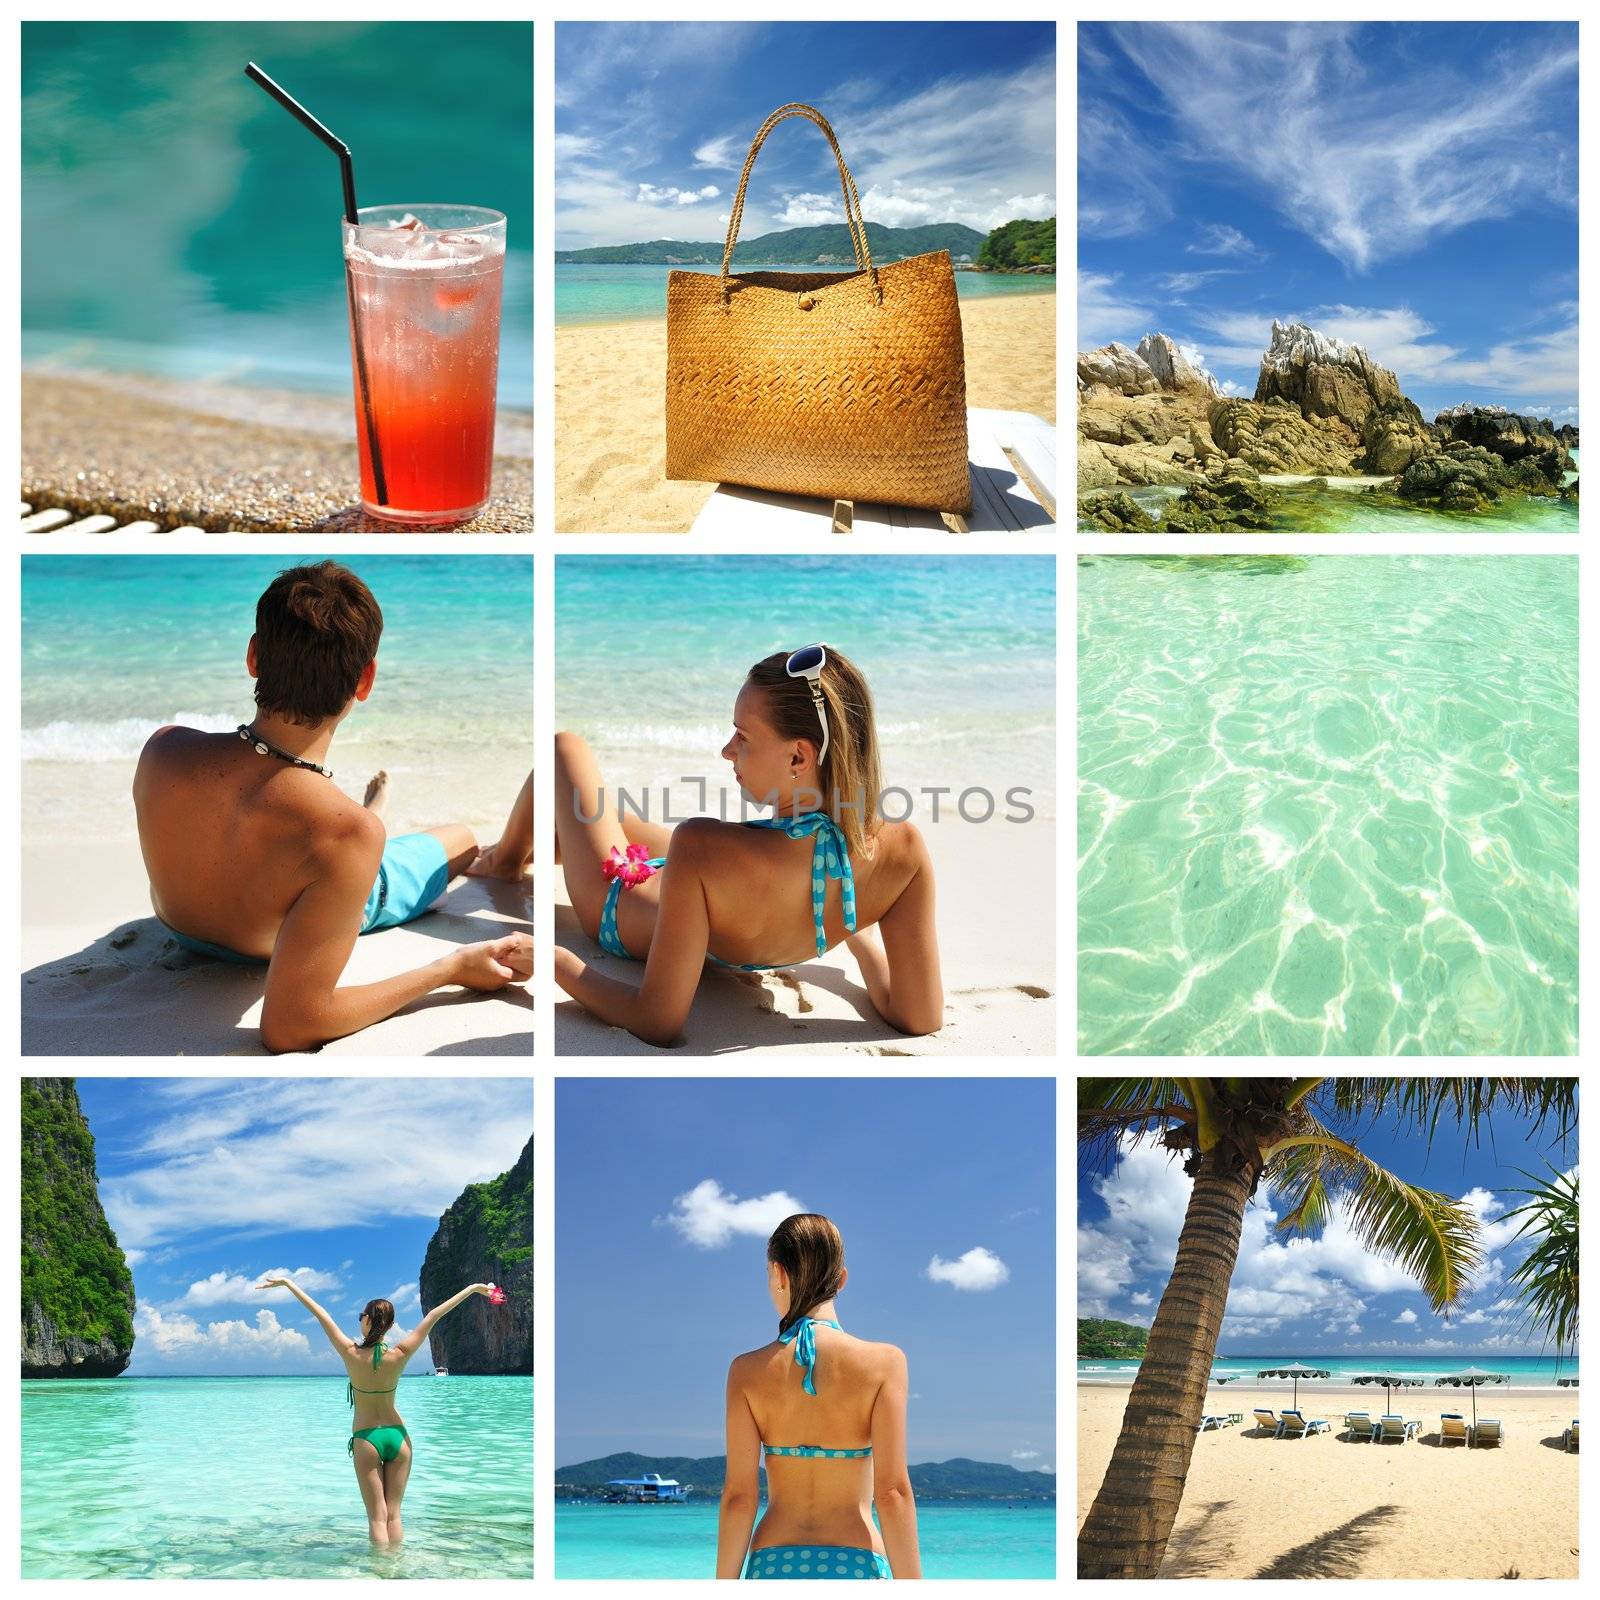 Resort collage by haveseen